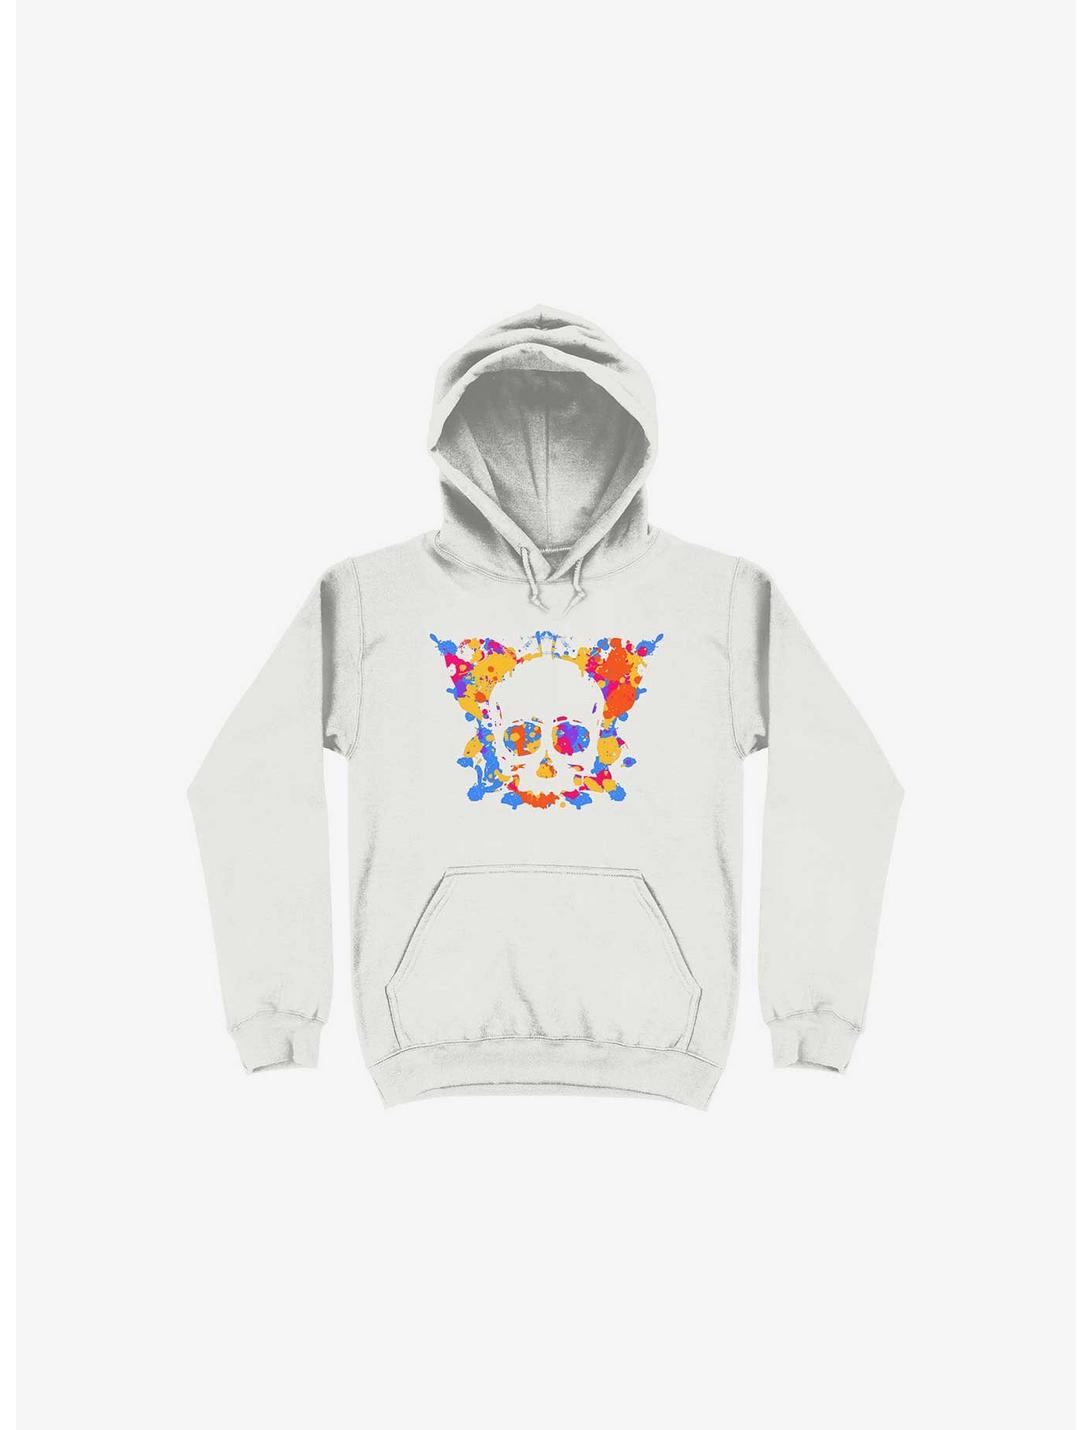 Inkblot Test Skull And Butterfly Hoodie, WHITE, hi-res